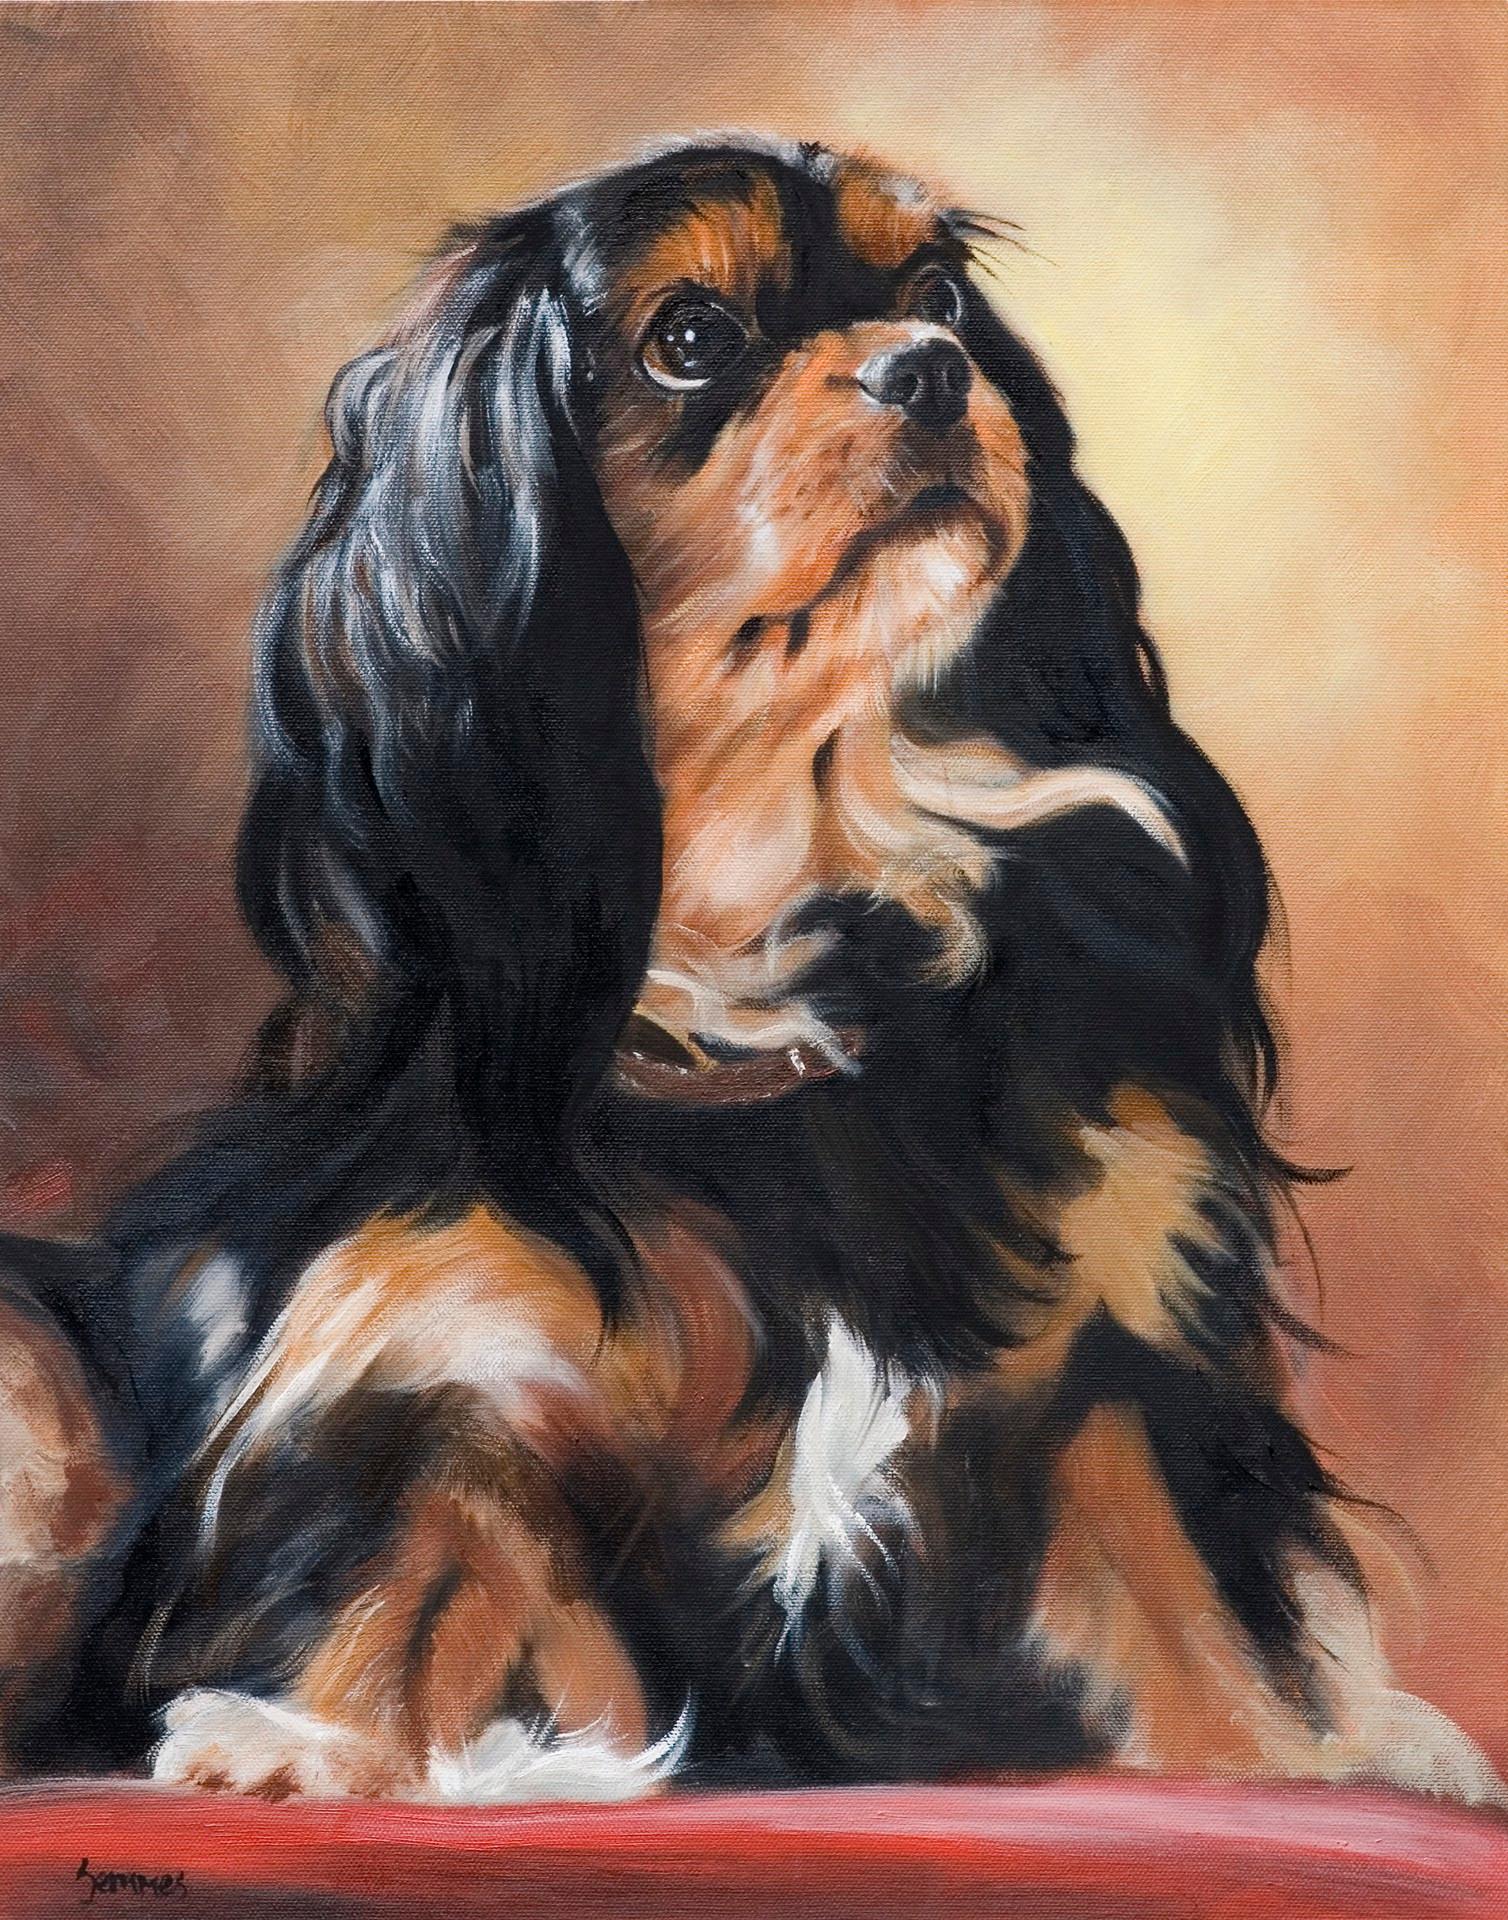 Romantic Cavalier King Charles Spaniel dog painting bathed in Caravaggio light